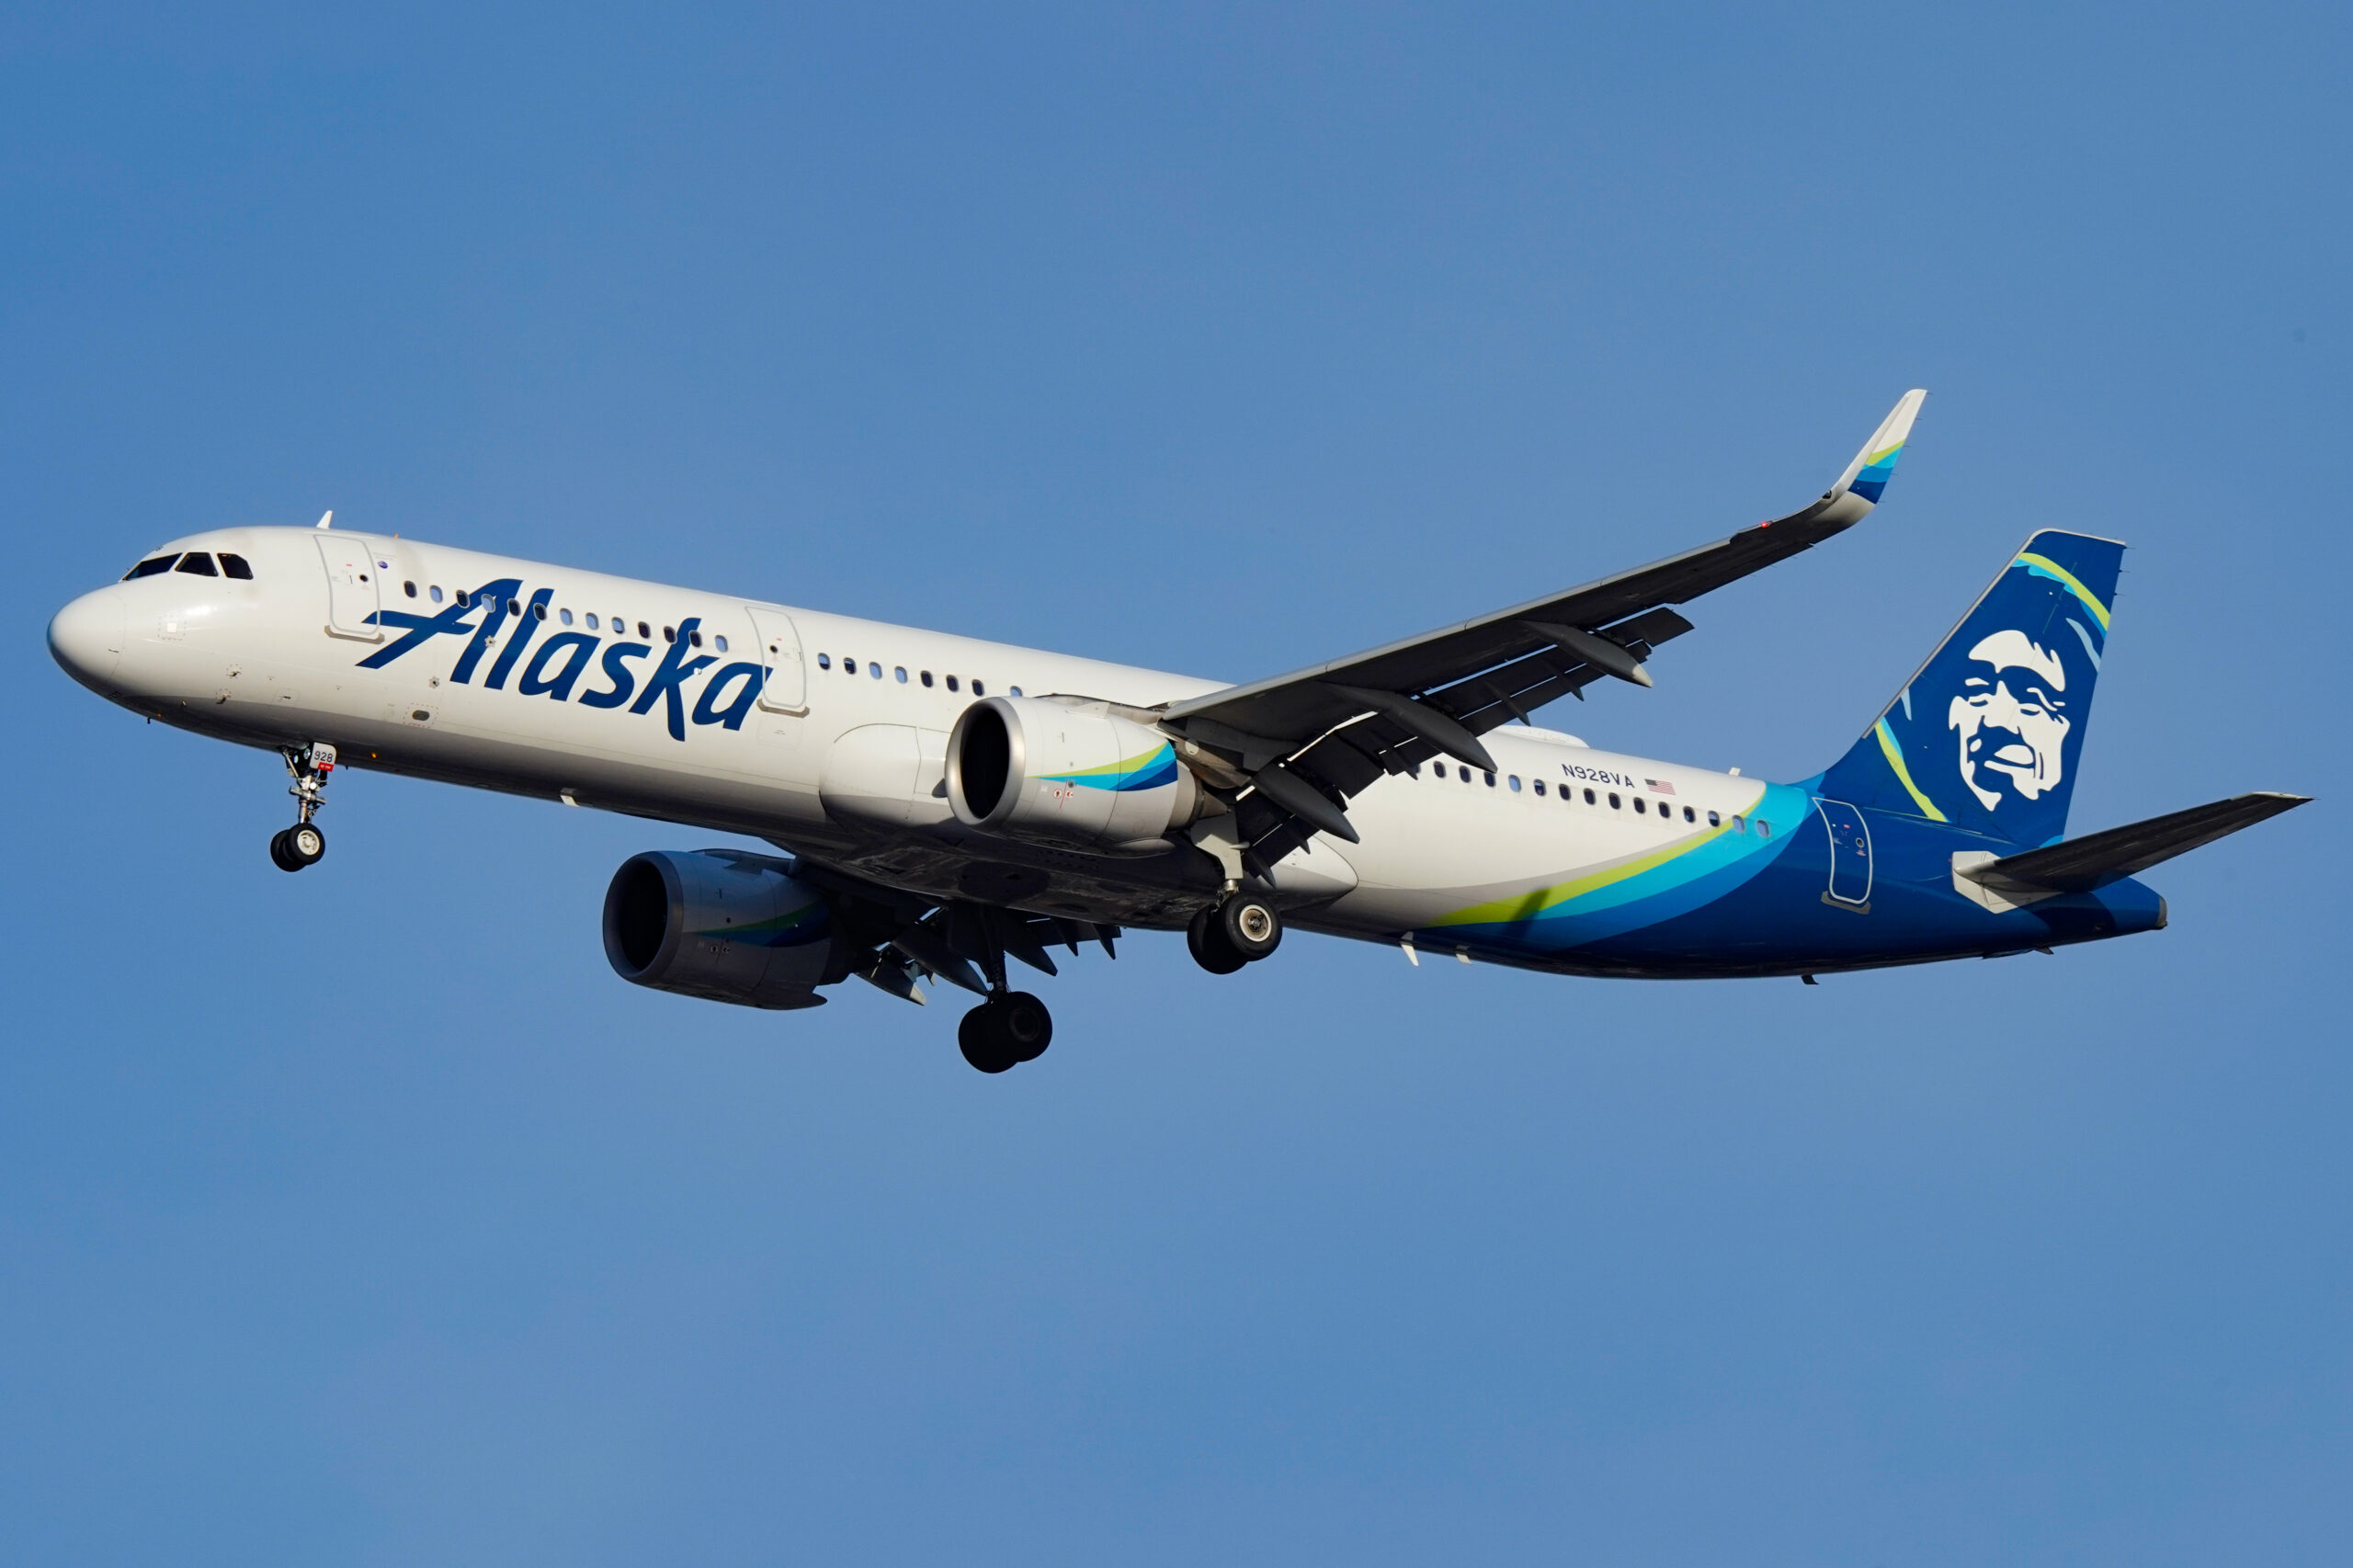 Alaska Airlines Continues To Exceed Pre-COVID Numbers